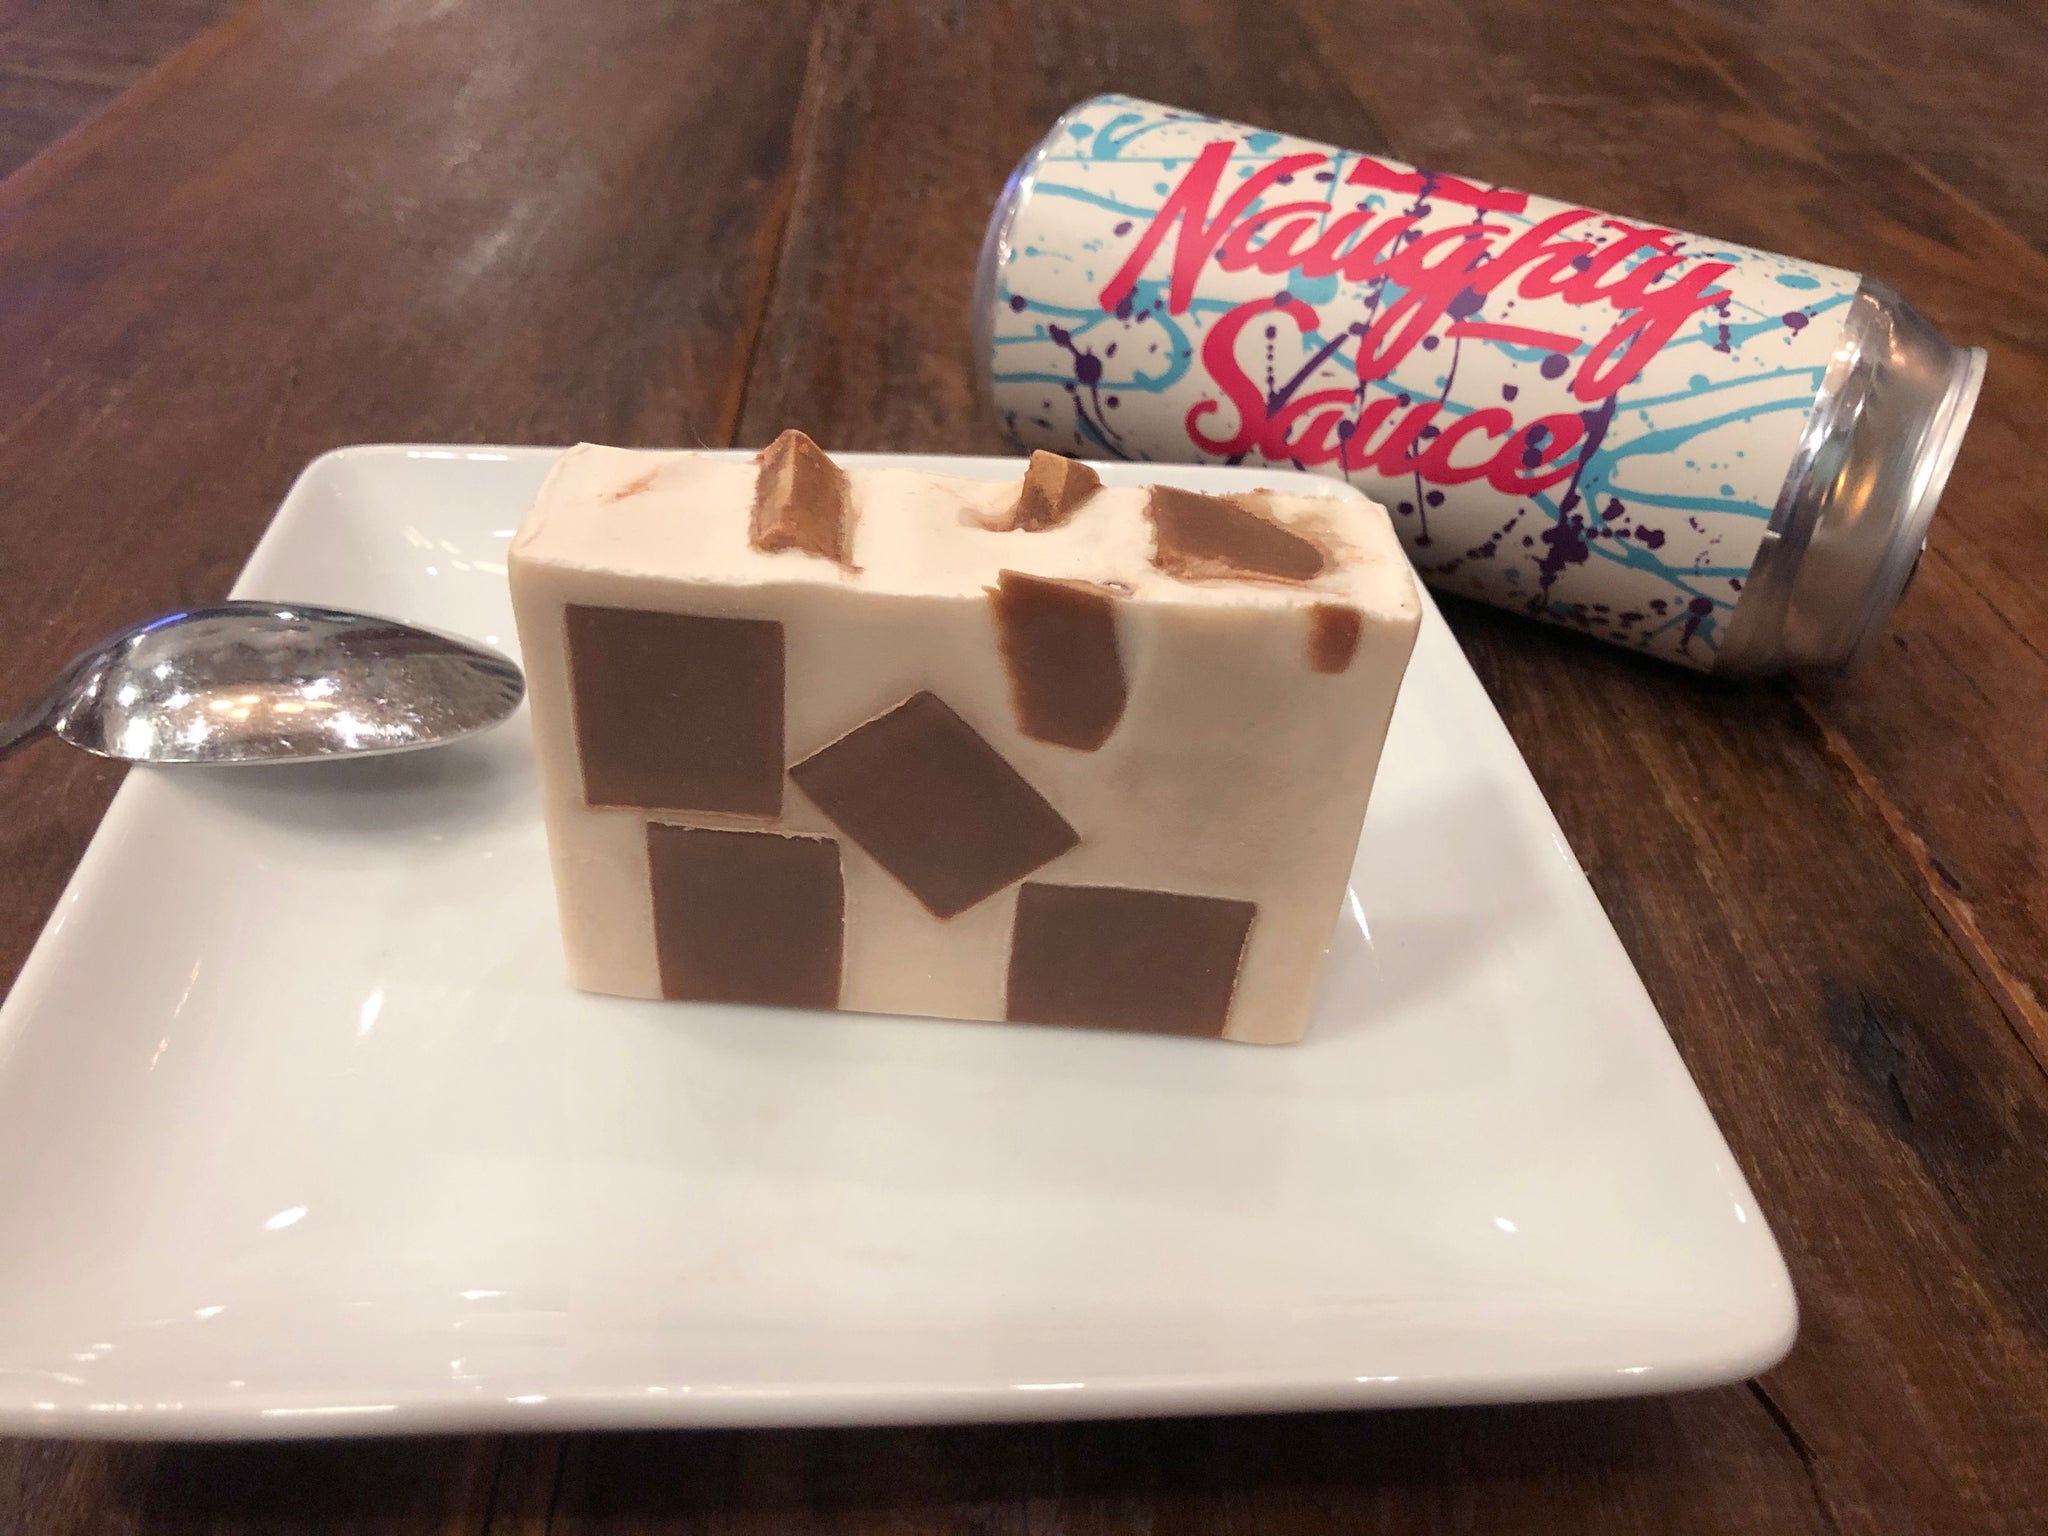 California beer soap handcrafted by spunkndisorderly craft beer soaps with naughty sauce: cinnamon roast crunch golden milk stout California craft beer from noble ale works Anaheim brewery Cinnamon Toast Crunch beer soap white with brown cereal squares cinnamon beer soap